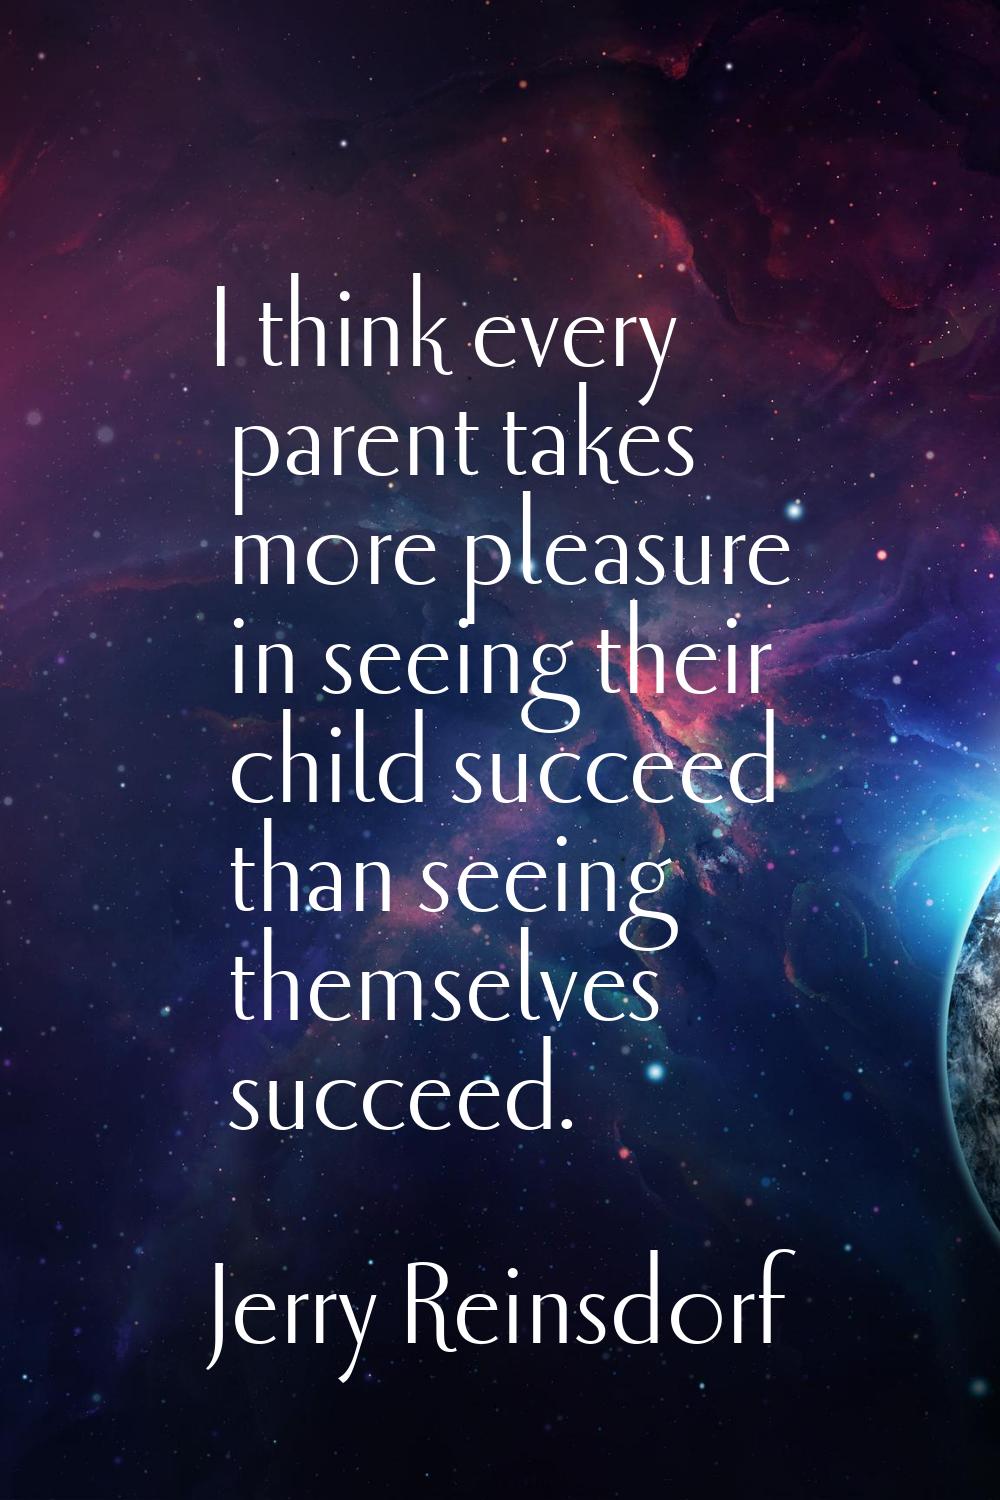 I think every parent takes more pleasure in seeing their child succeed than seeing themselves succe